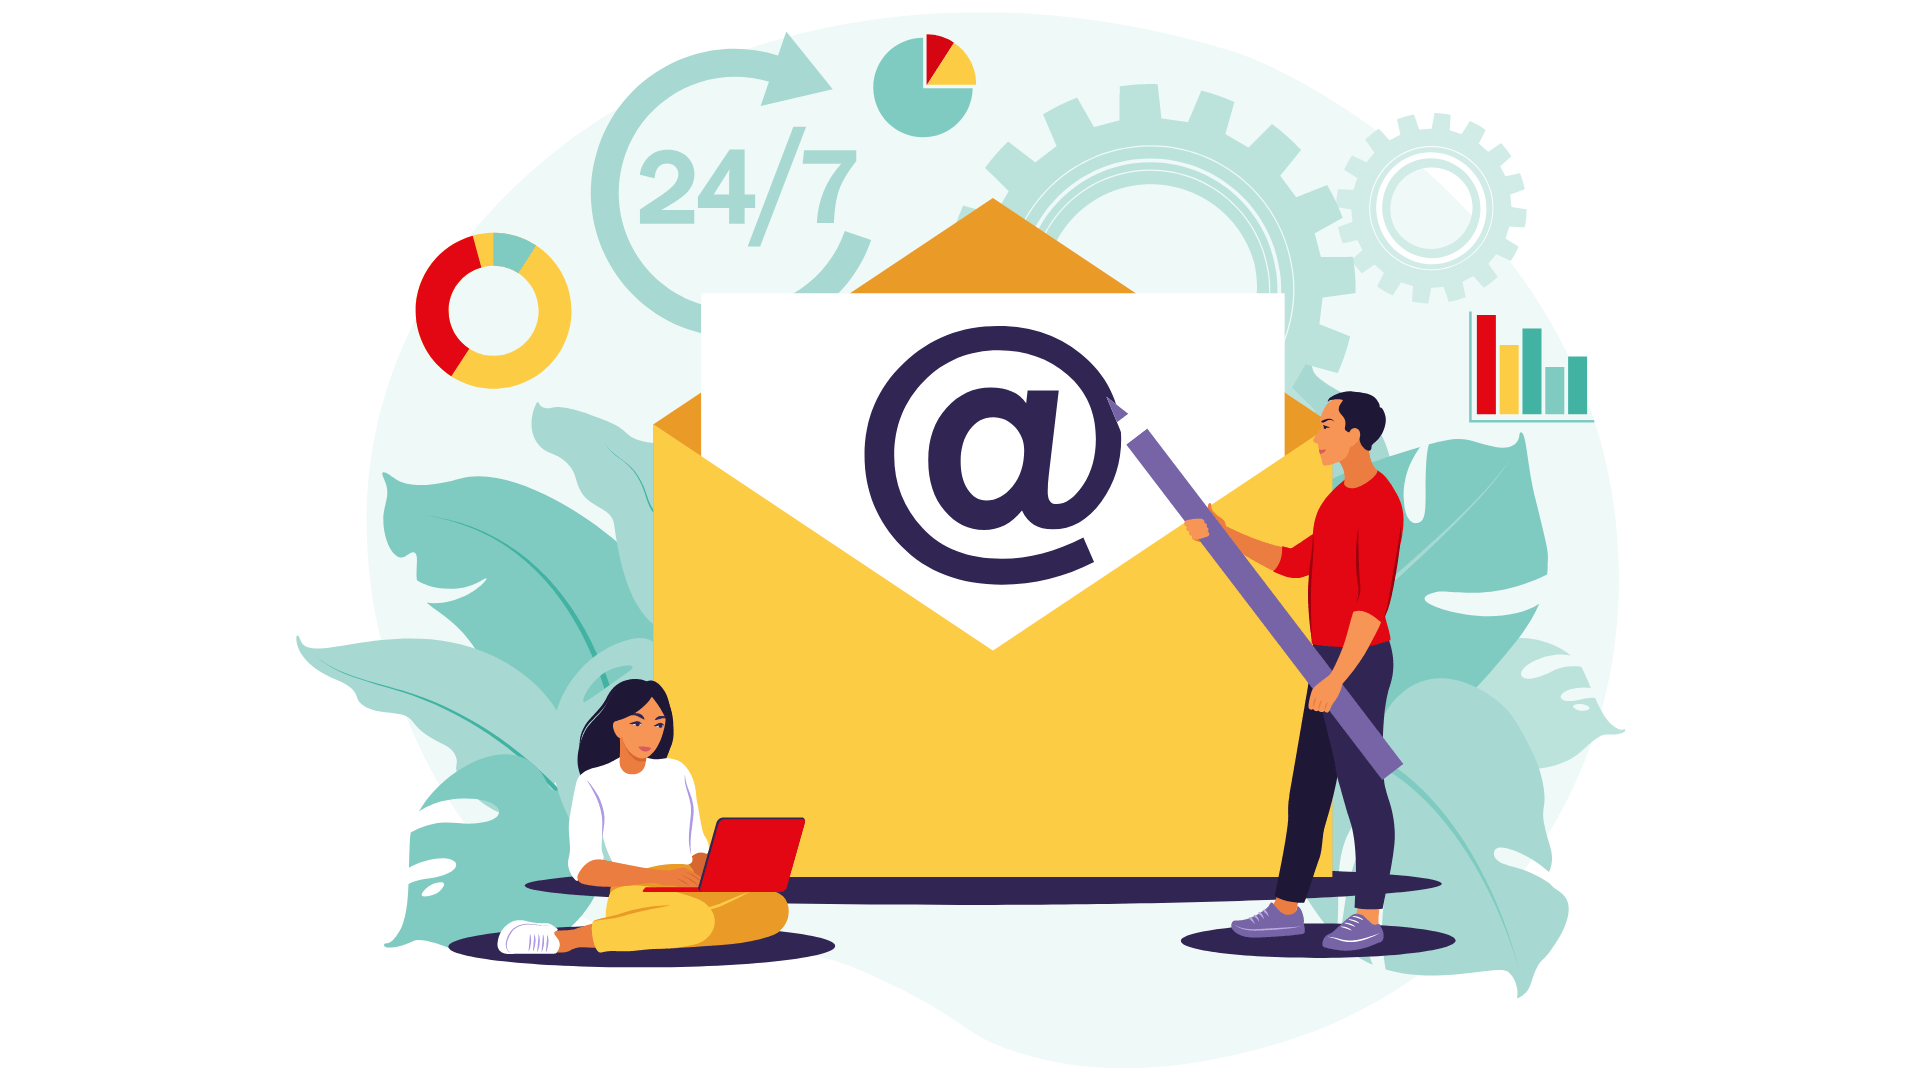 email marketing can drive traffic to your amazon listing